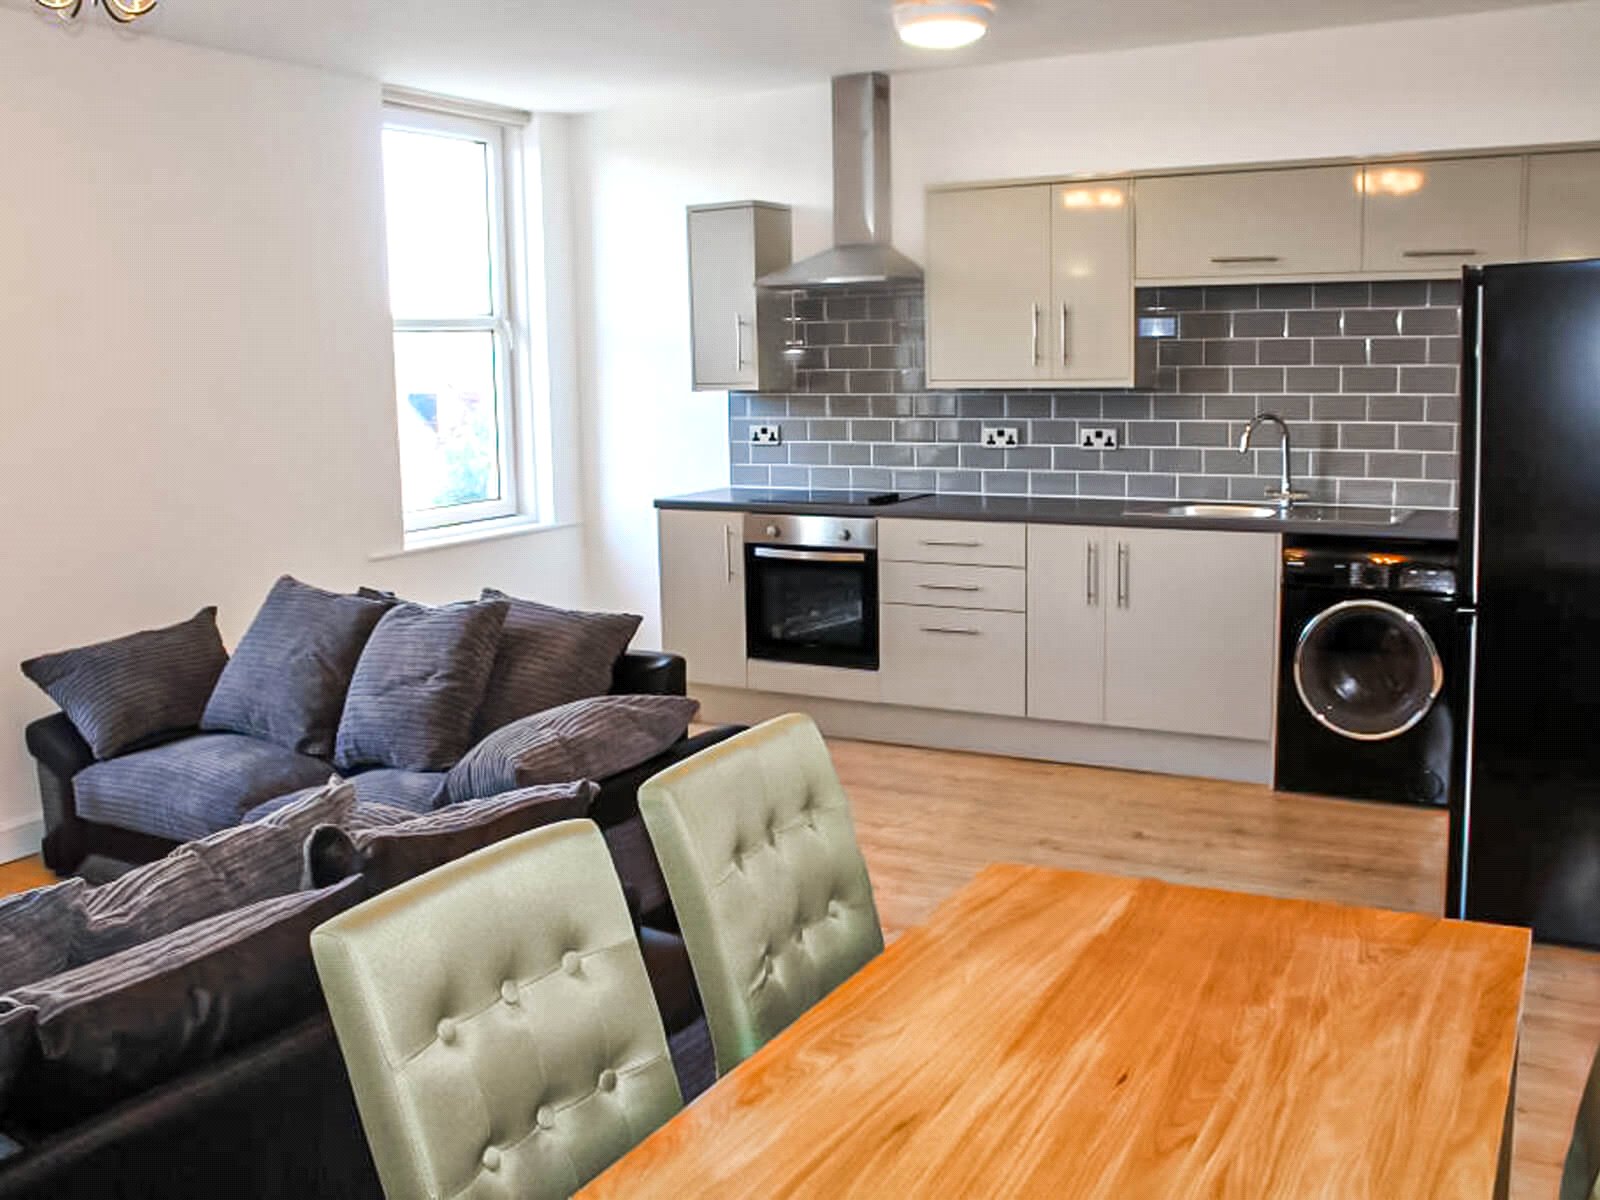 2 bed apartment for rent in Harrogate. From YPP - Leeds